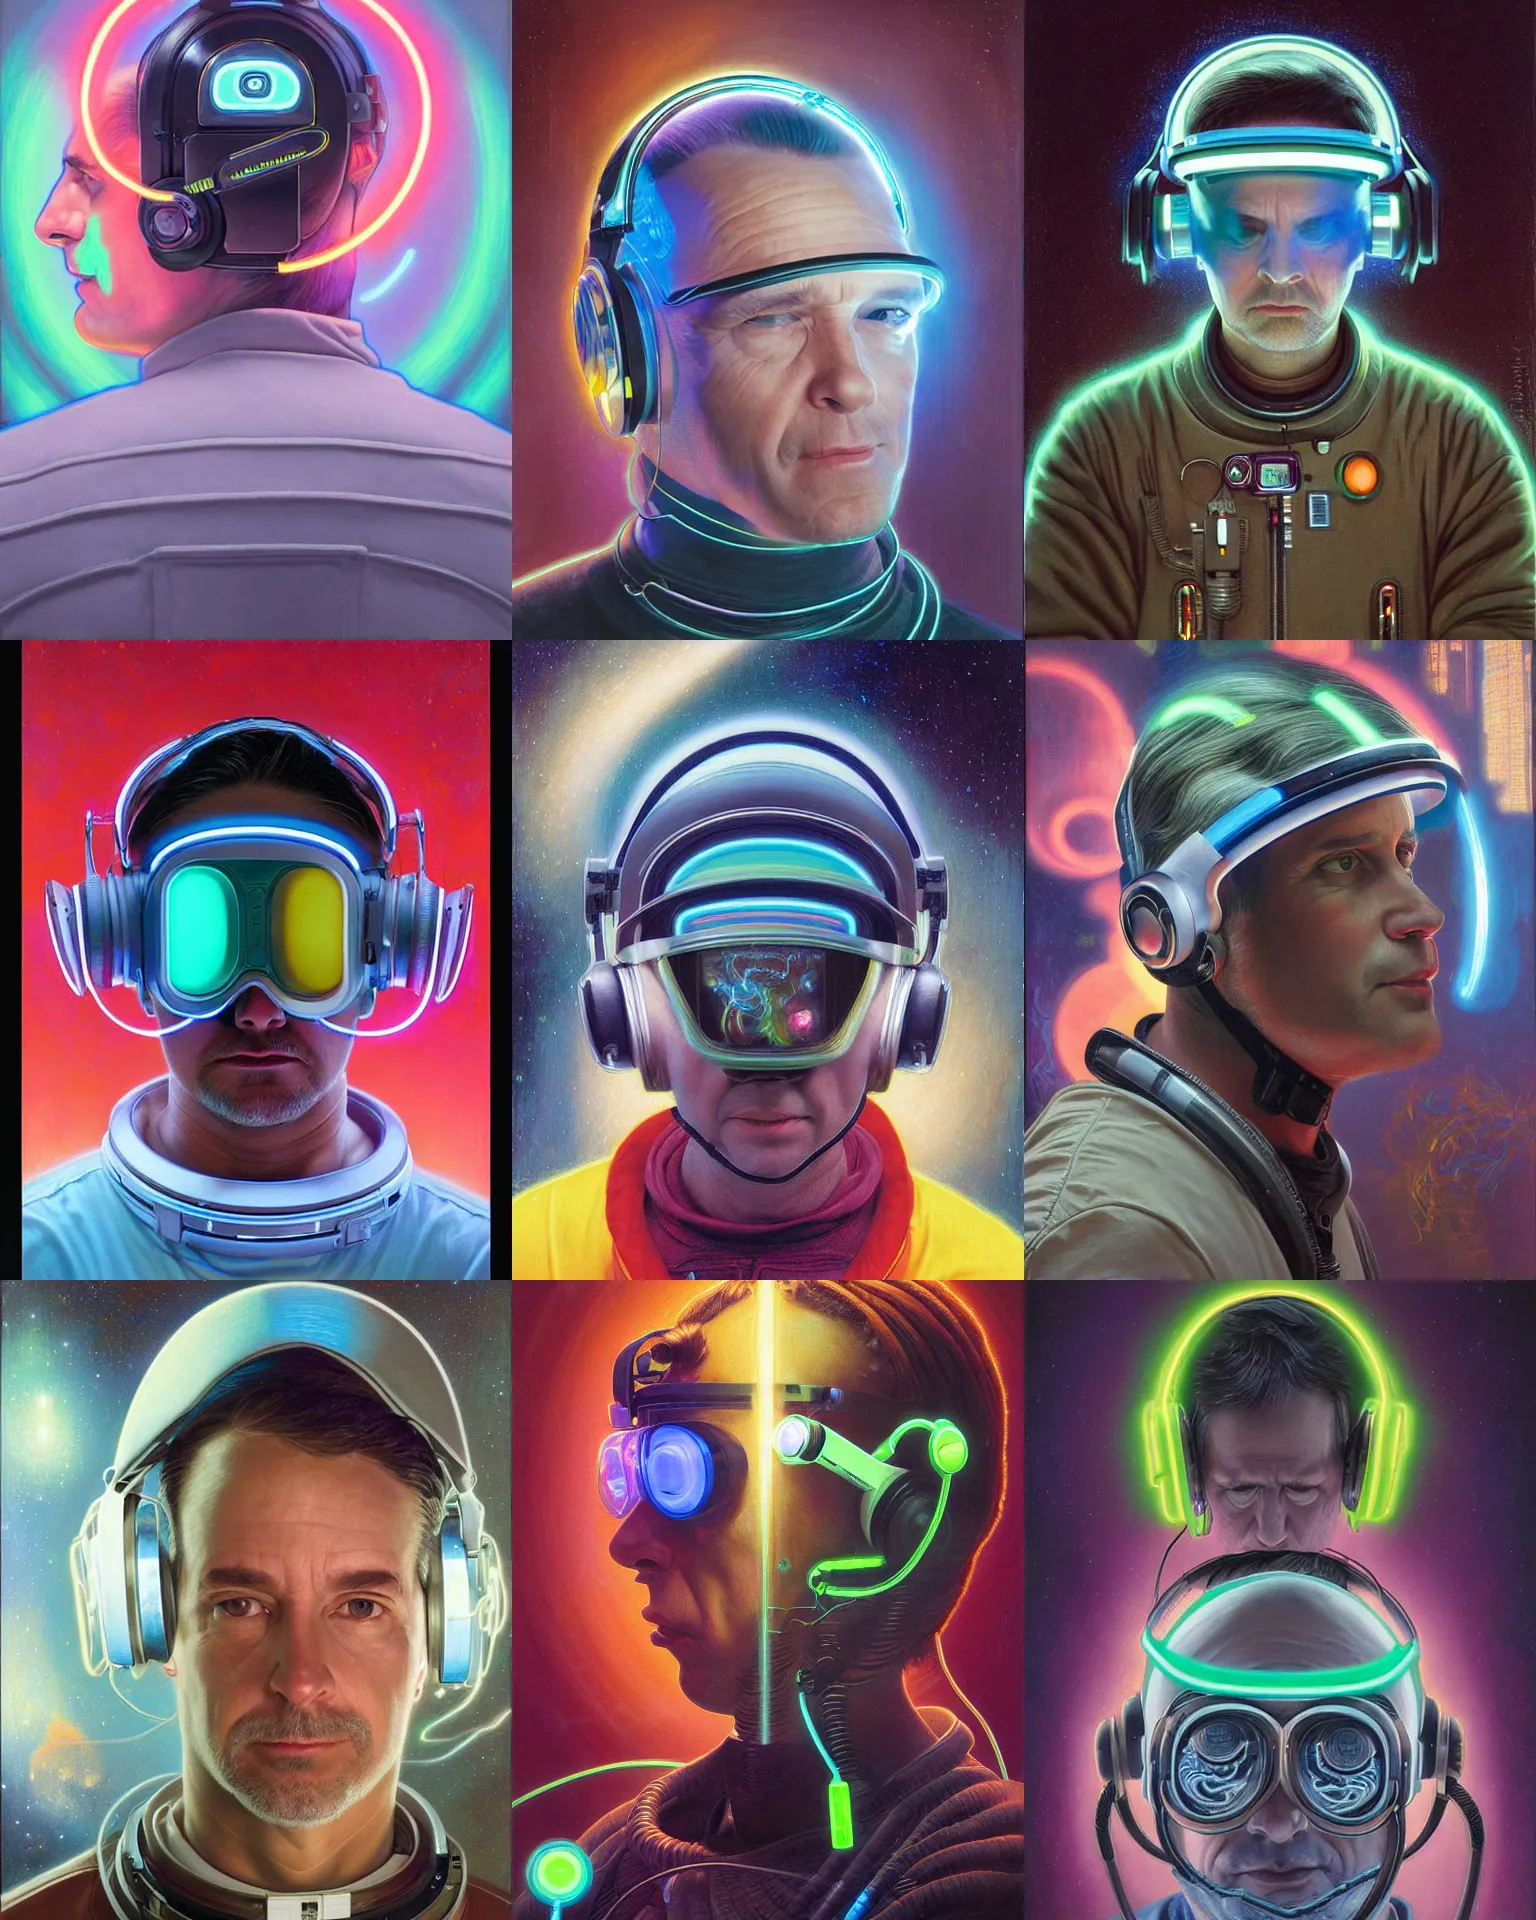 Prompt: future coder, graying hair, glowing visor over eyes and sleek neon headphones headshot desaturated profile painting by donato giancola, dean cornwall, rhads, tom whalen, alex grey, alphonse mucha, astronaut cyberpunk electric fashion photography